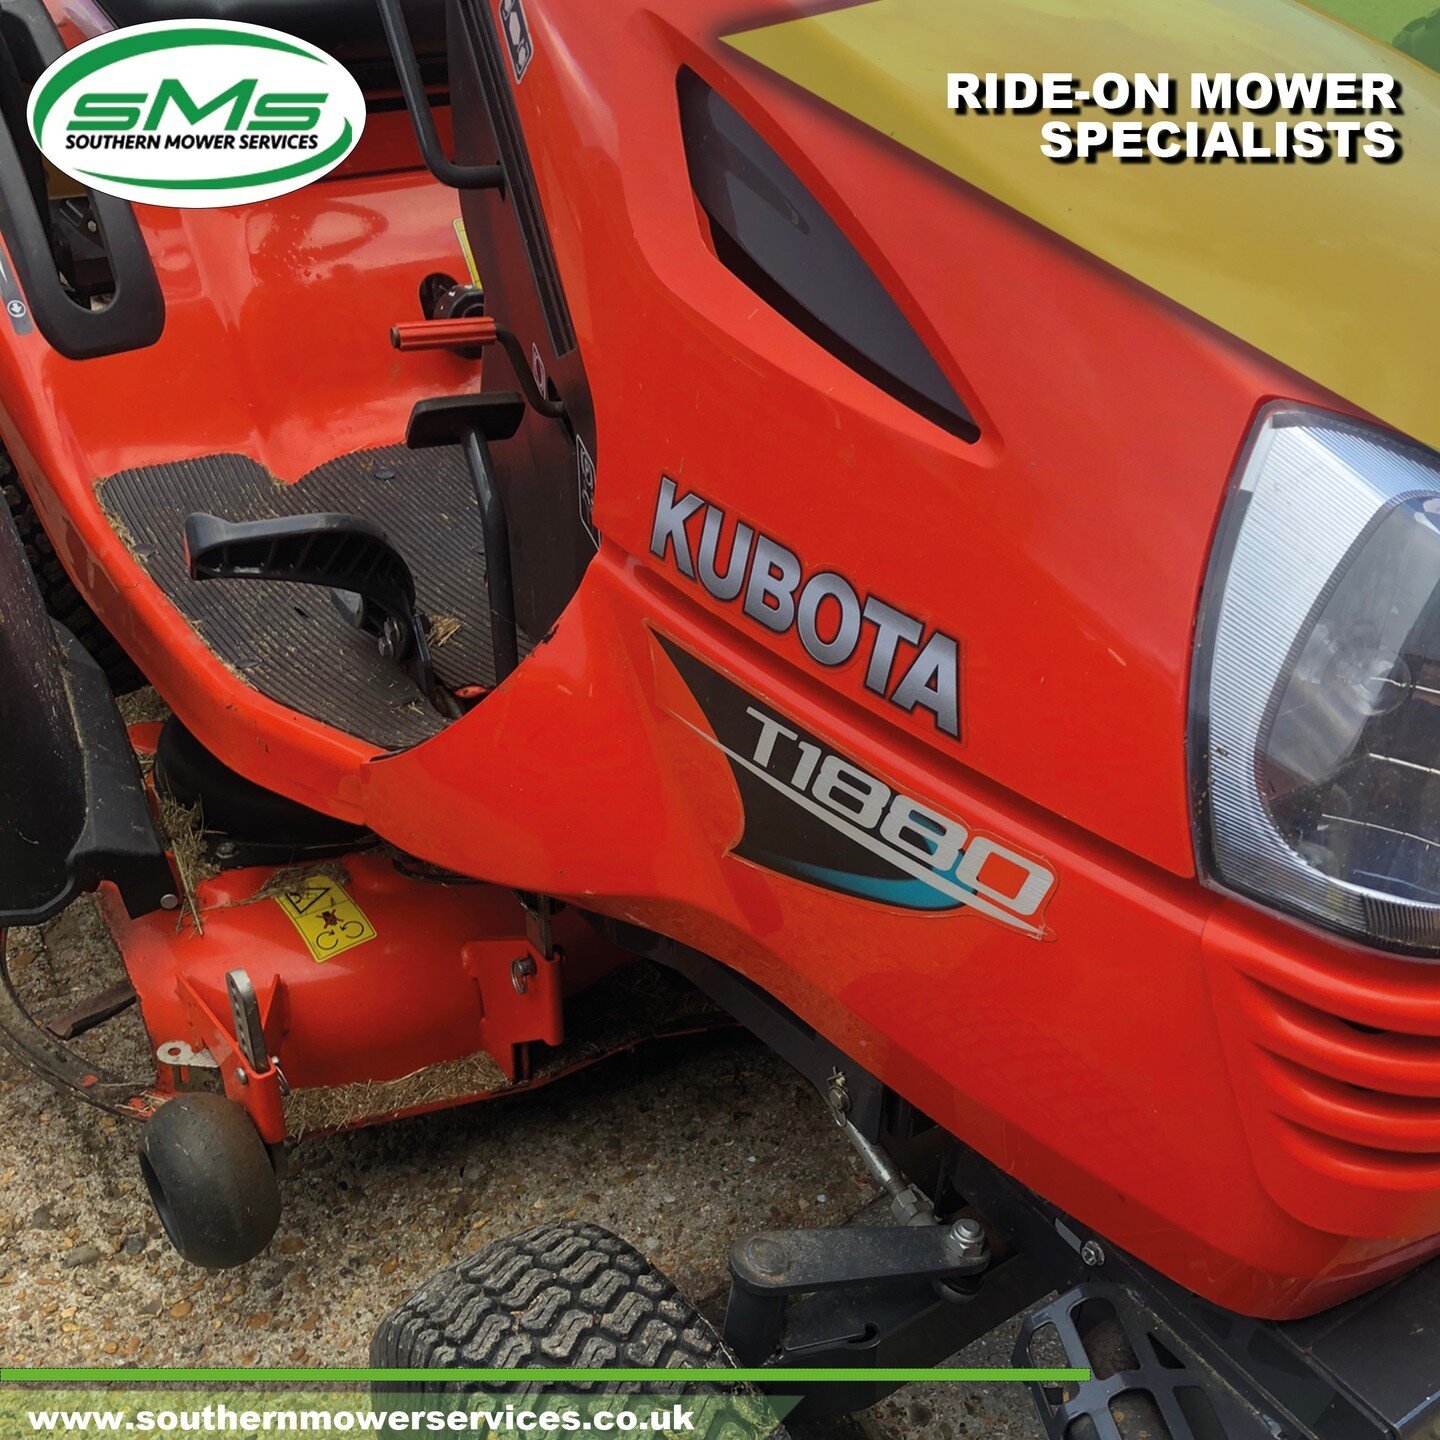 Are you thinking about upgrading your Ride-on Mower? Talk to us about our Part-Exchange options and get a great deal on your next Ride-on.⁠
.⁠
#rideonmower #zeroturnmower #southernmowerservices #hampshire #portsmouth #lawnmower